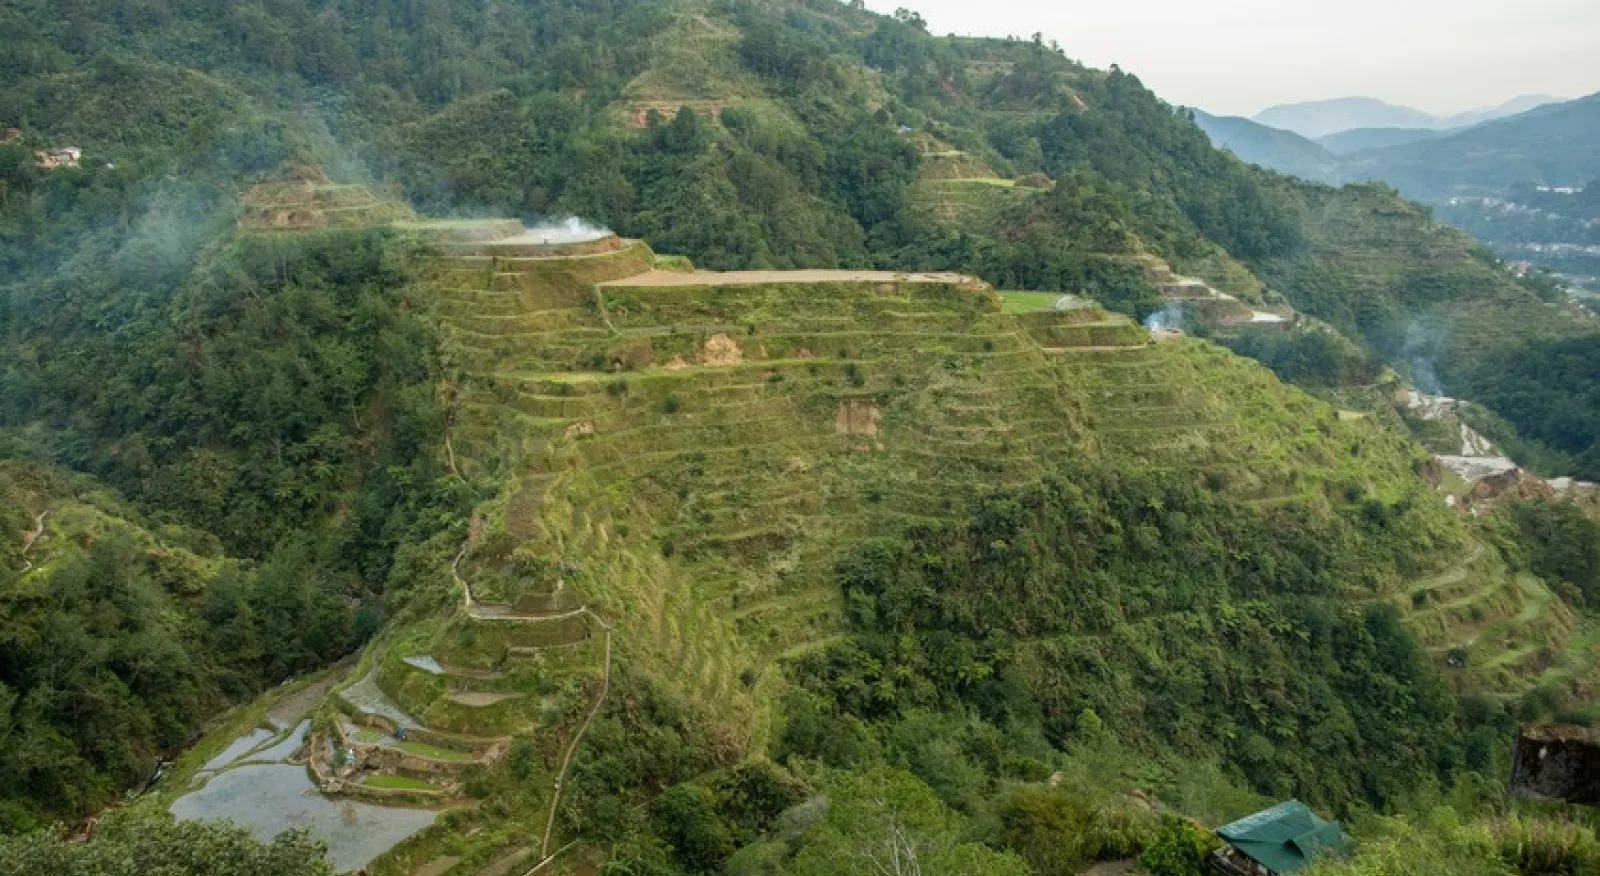 A mountain with rice paddies terraced down the side